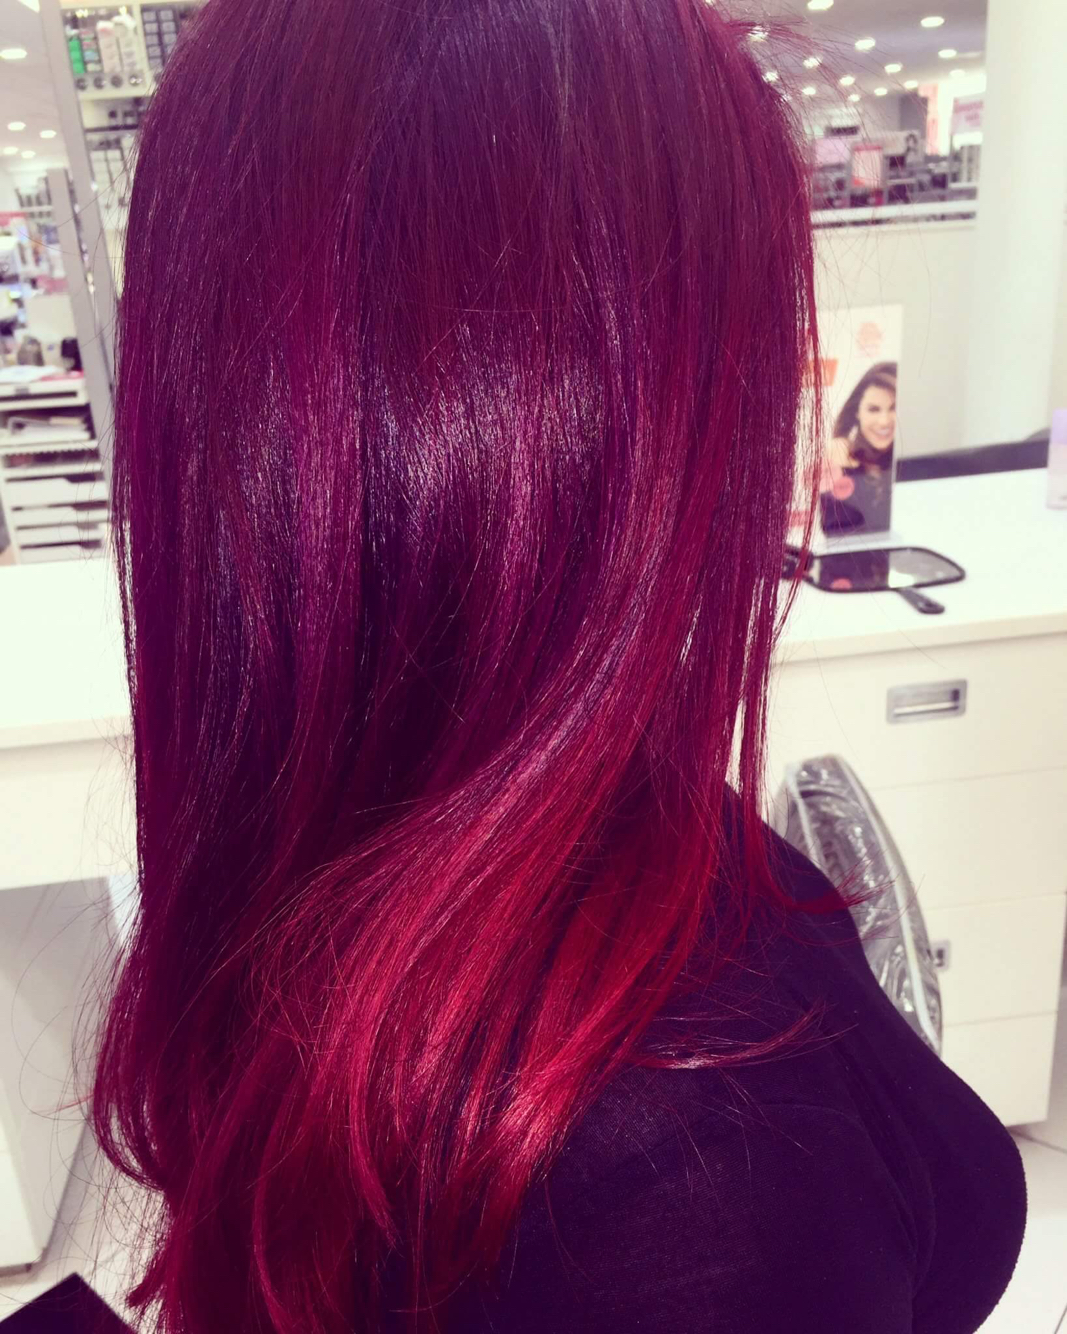 23 Ideas for trendy Magenta hair color – HairStyles for Women